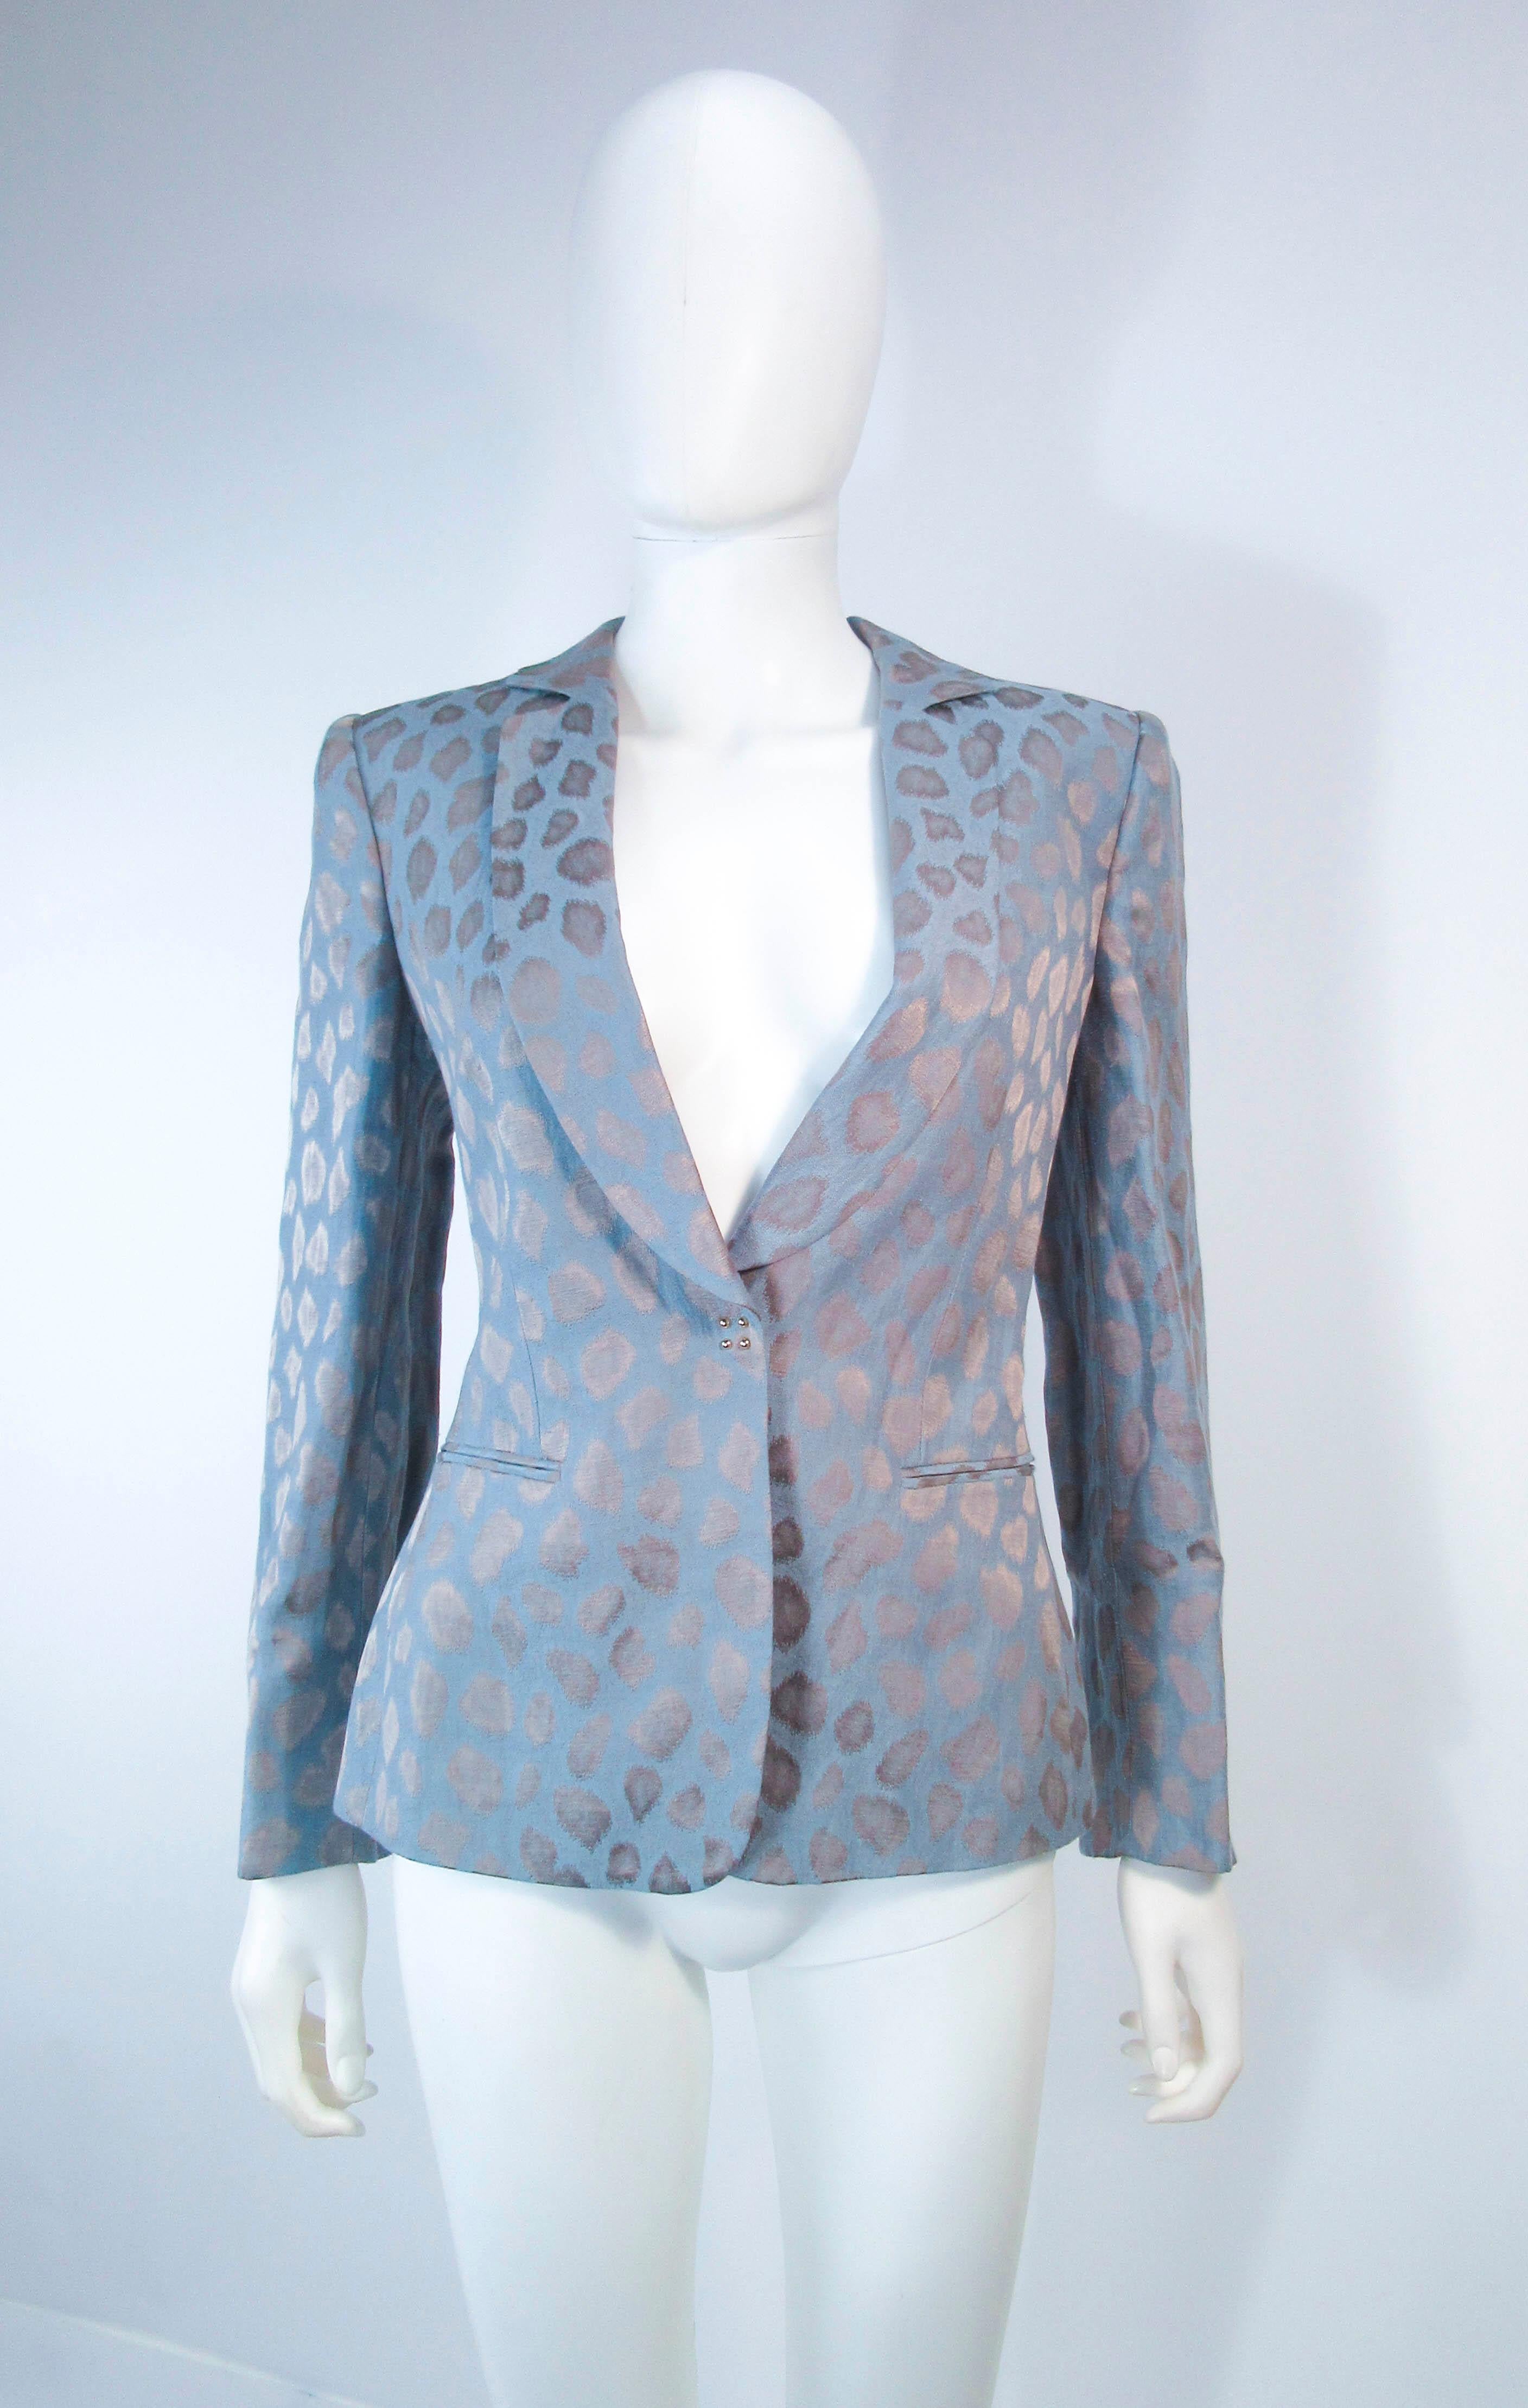 This Giorgio Armani is composed of a blue silk with a wonderful animal print. Features center front snap button closures. In excellent pre-owned condition. 

**Please cross-reference measurements for personal accuracy. Size in description box is an